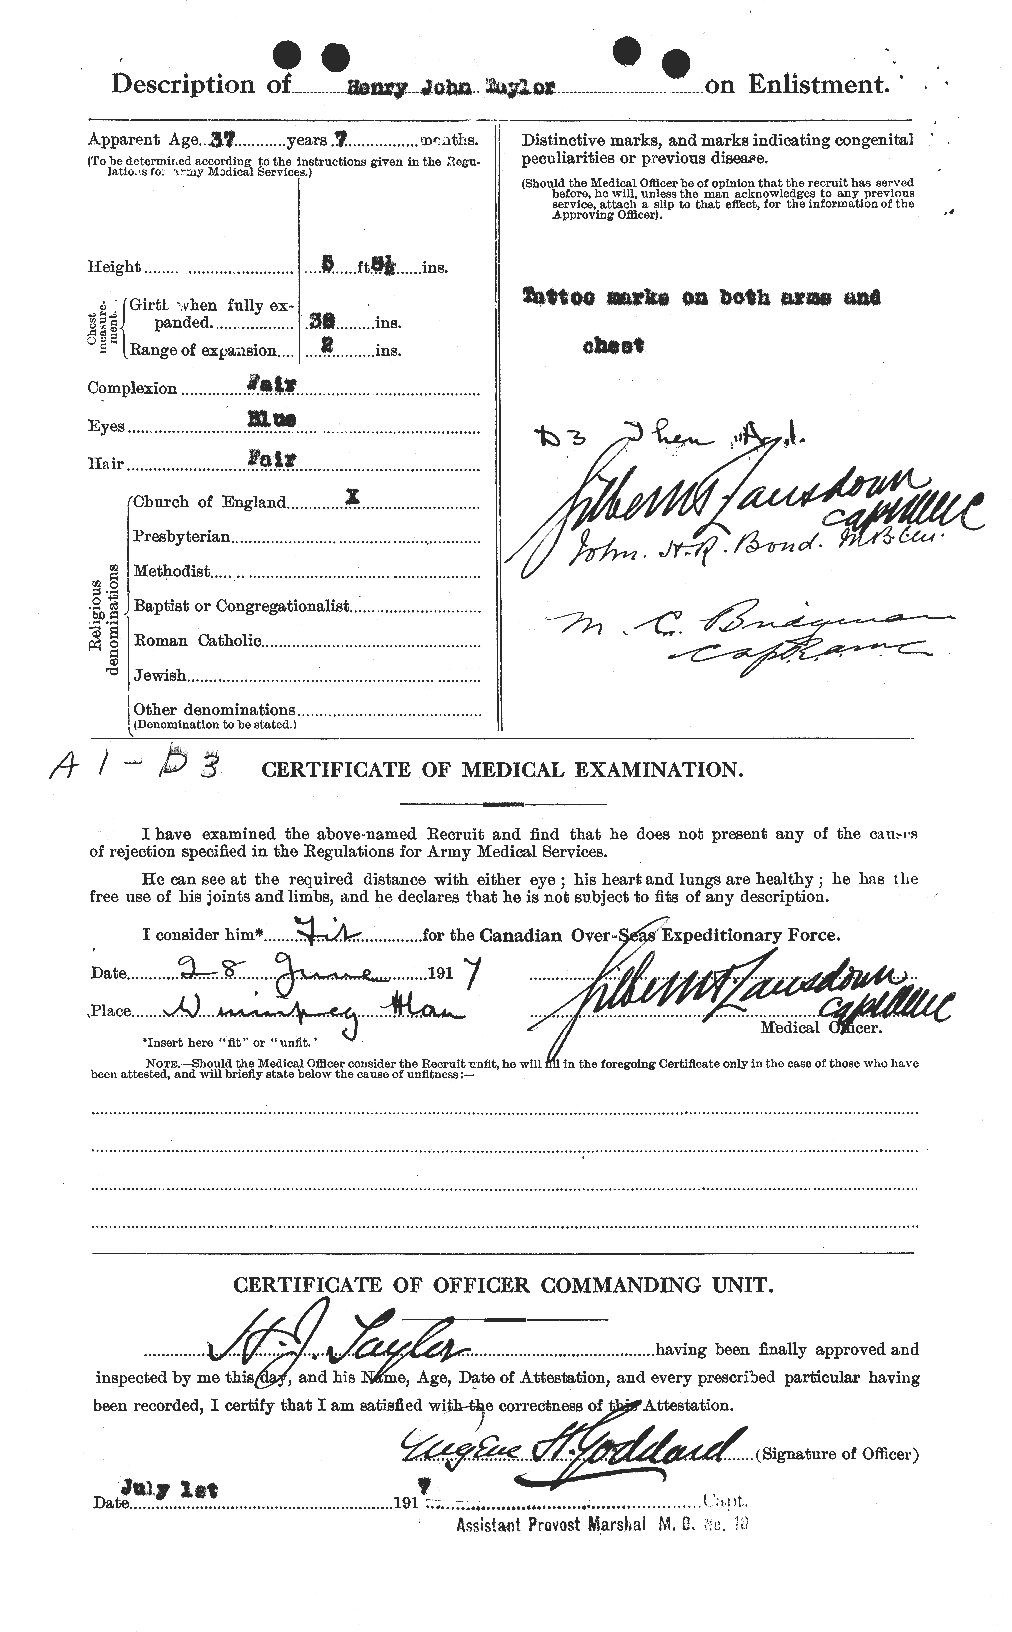 Personnel Records of the First World War - CEF 626547b